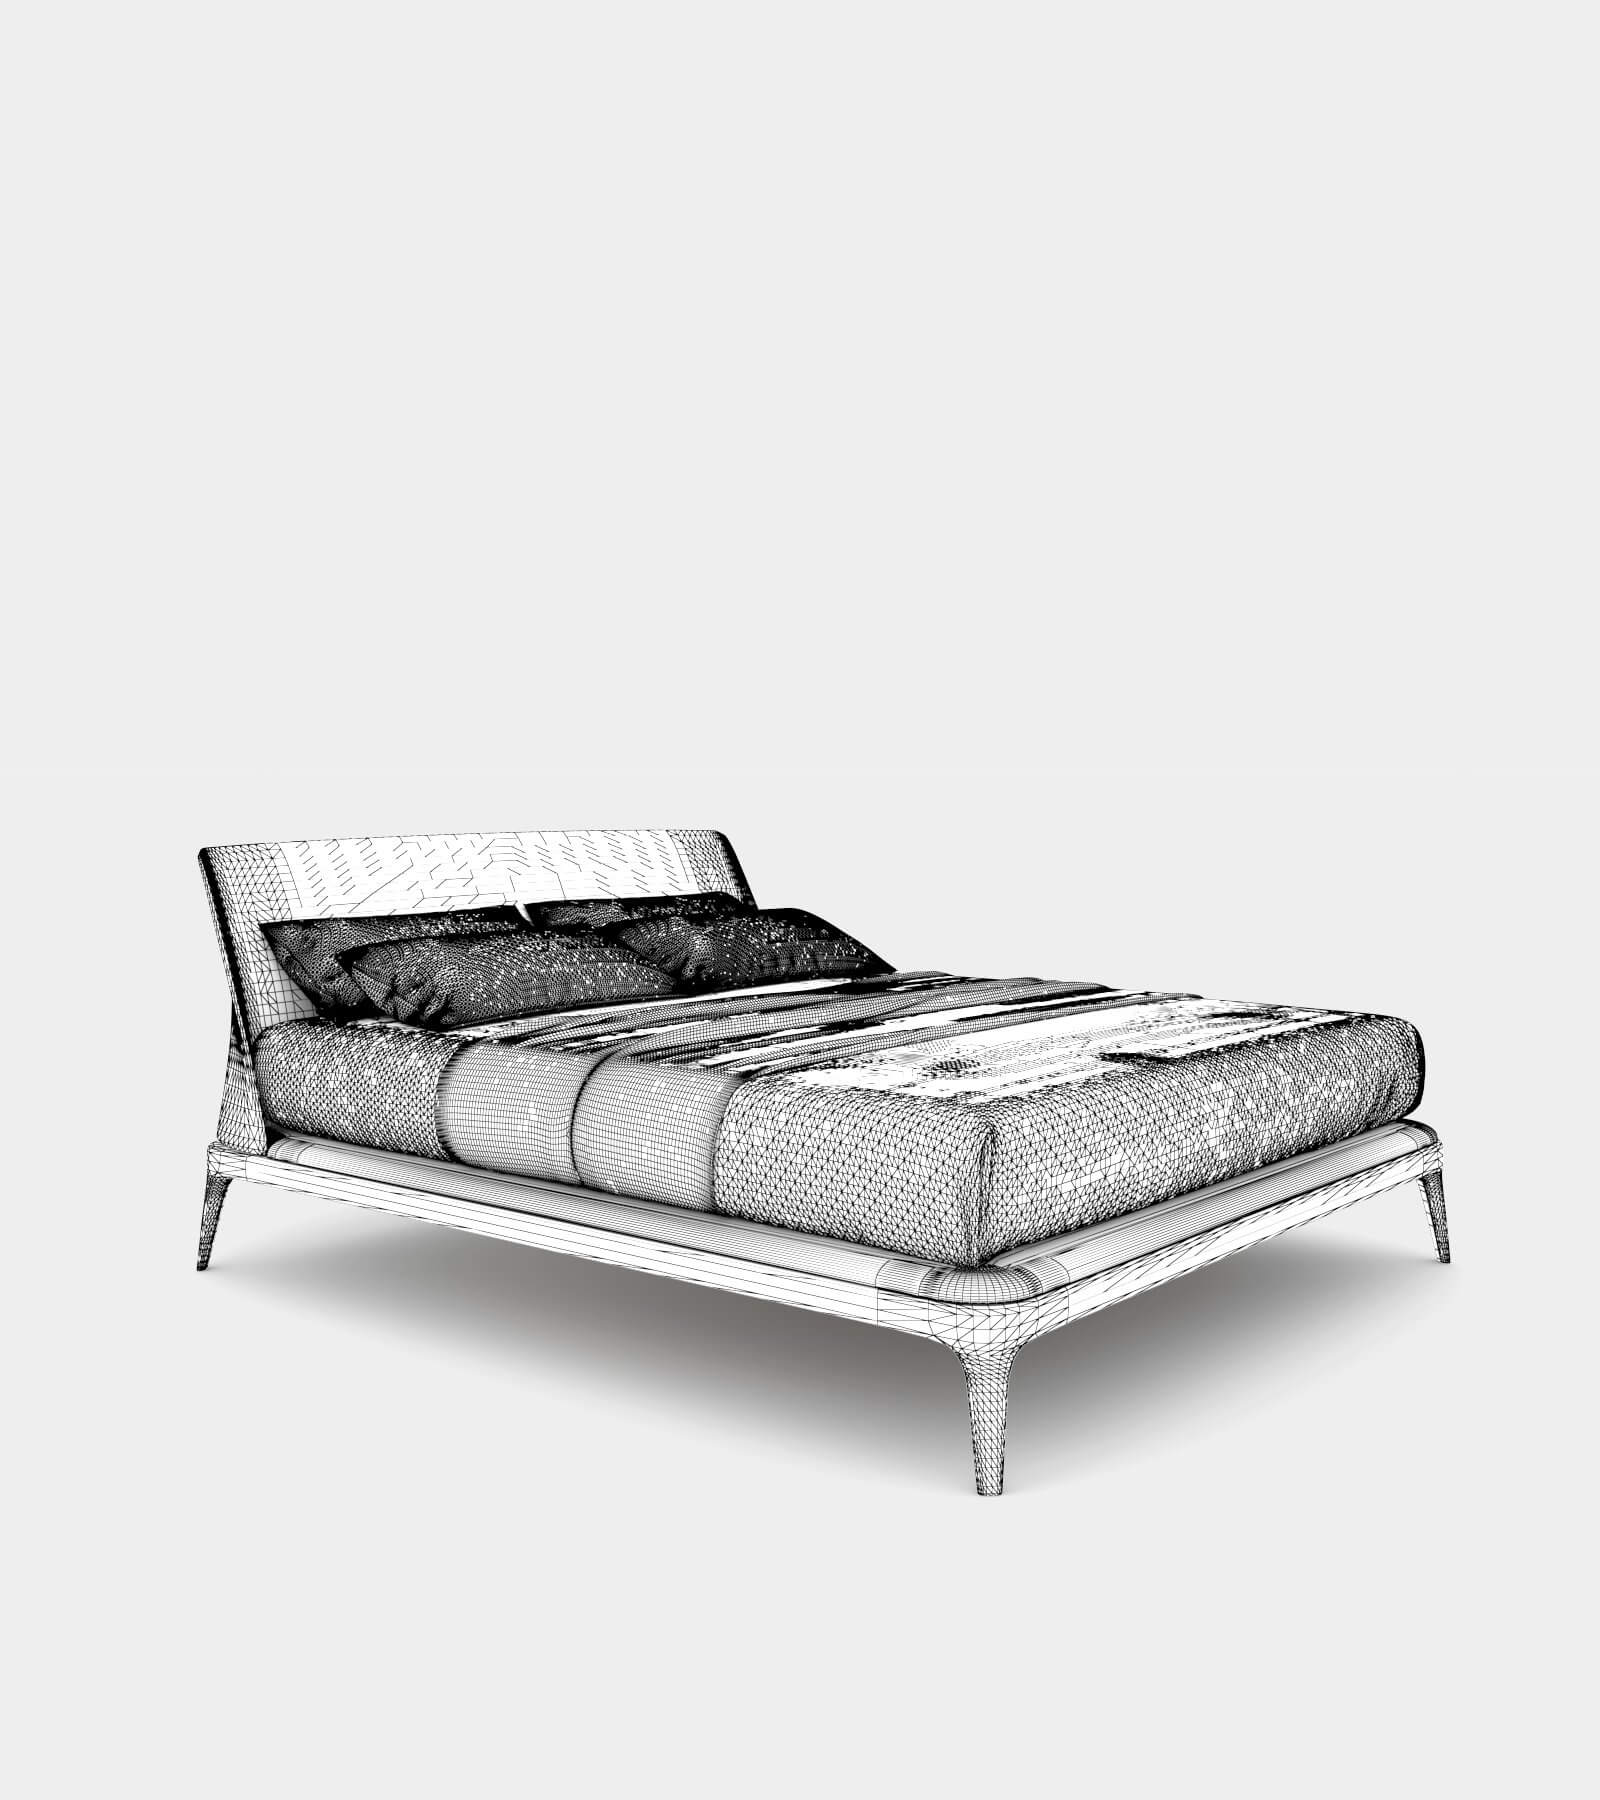 Modern double bed with bedhead-wire-2 3D Model